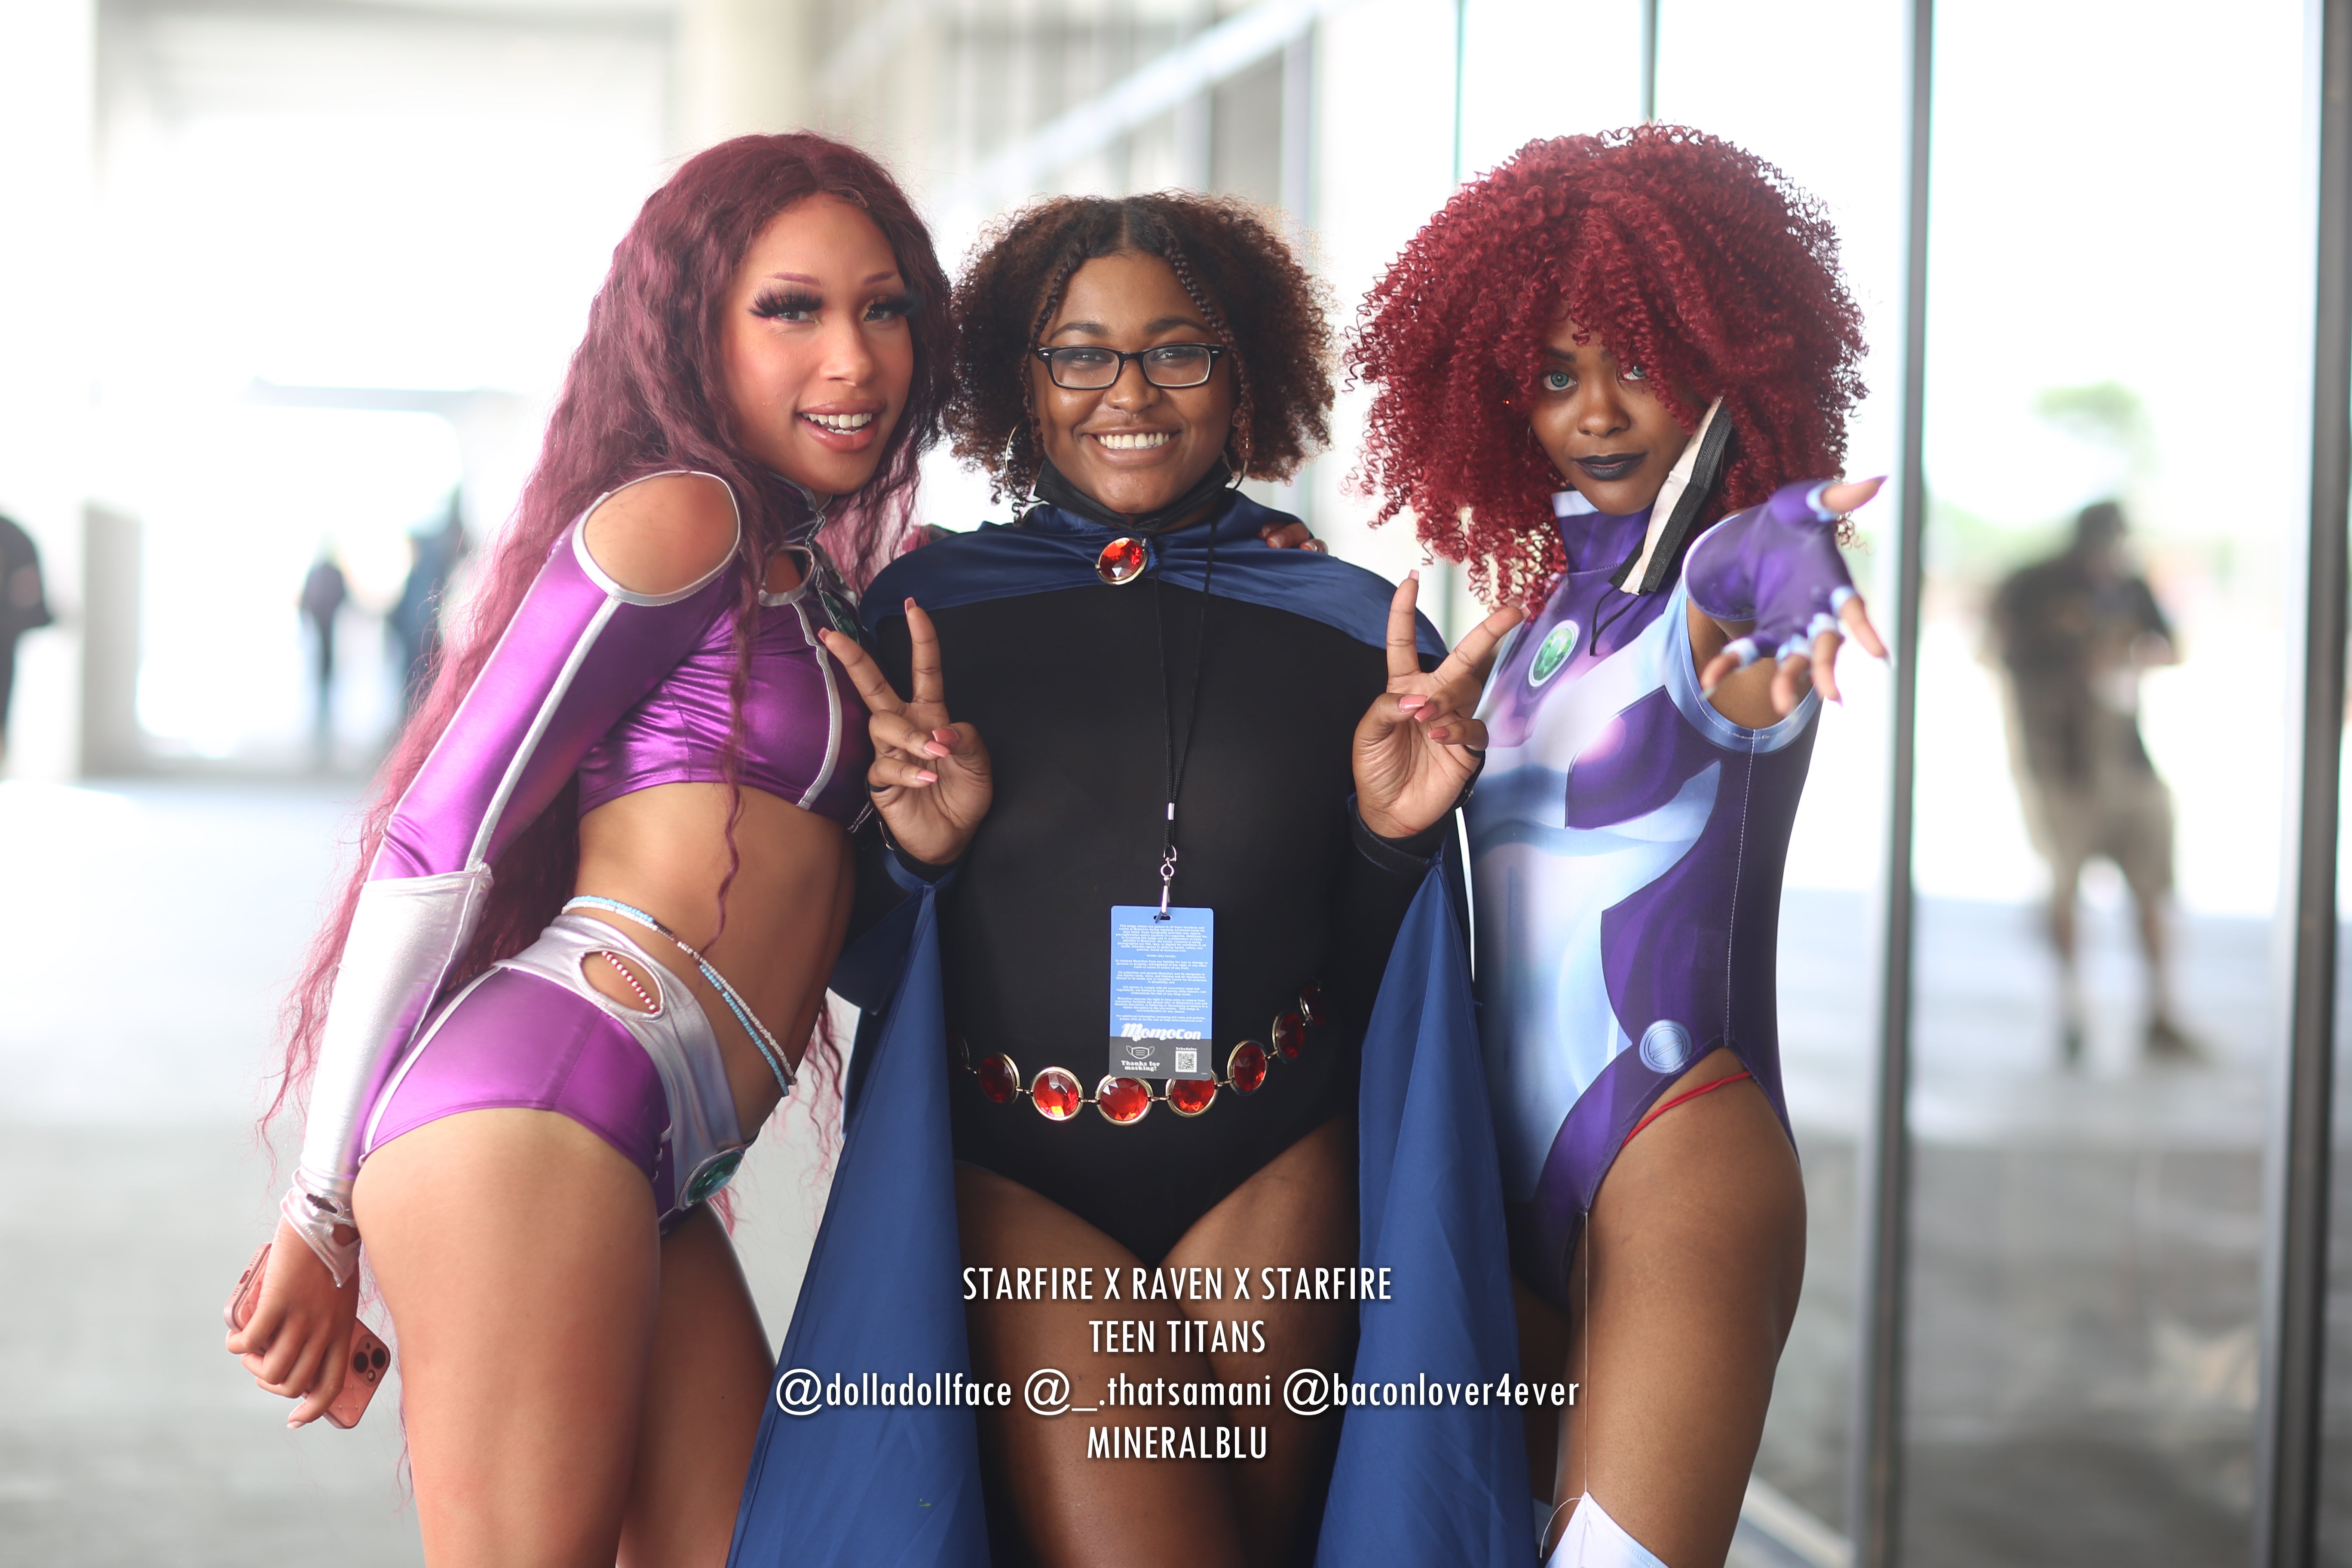 Our Favourite Cosplay From MomoCon 2022